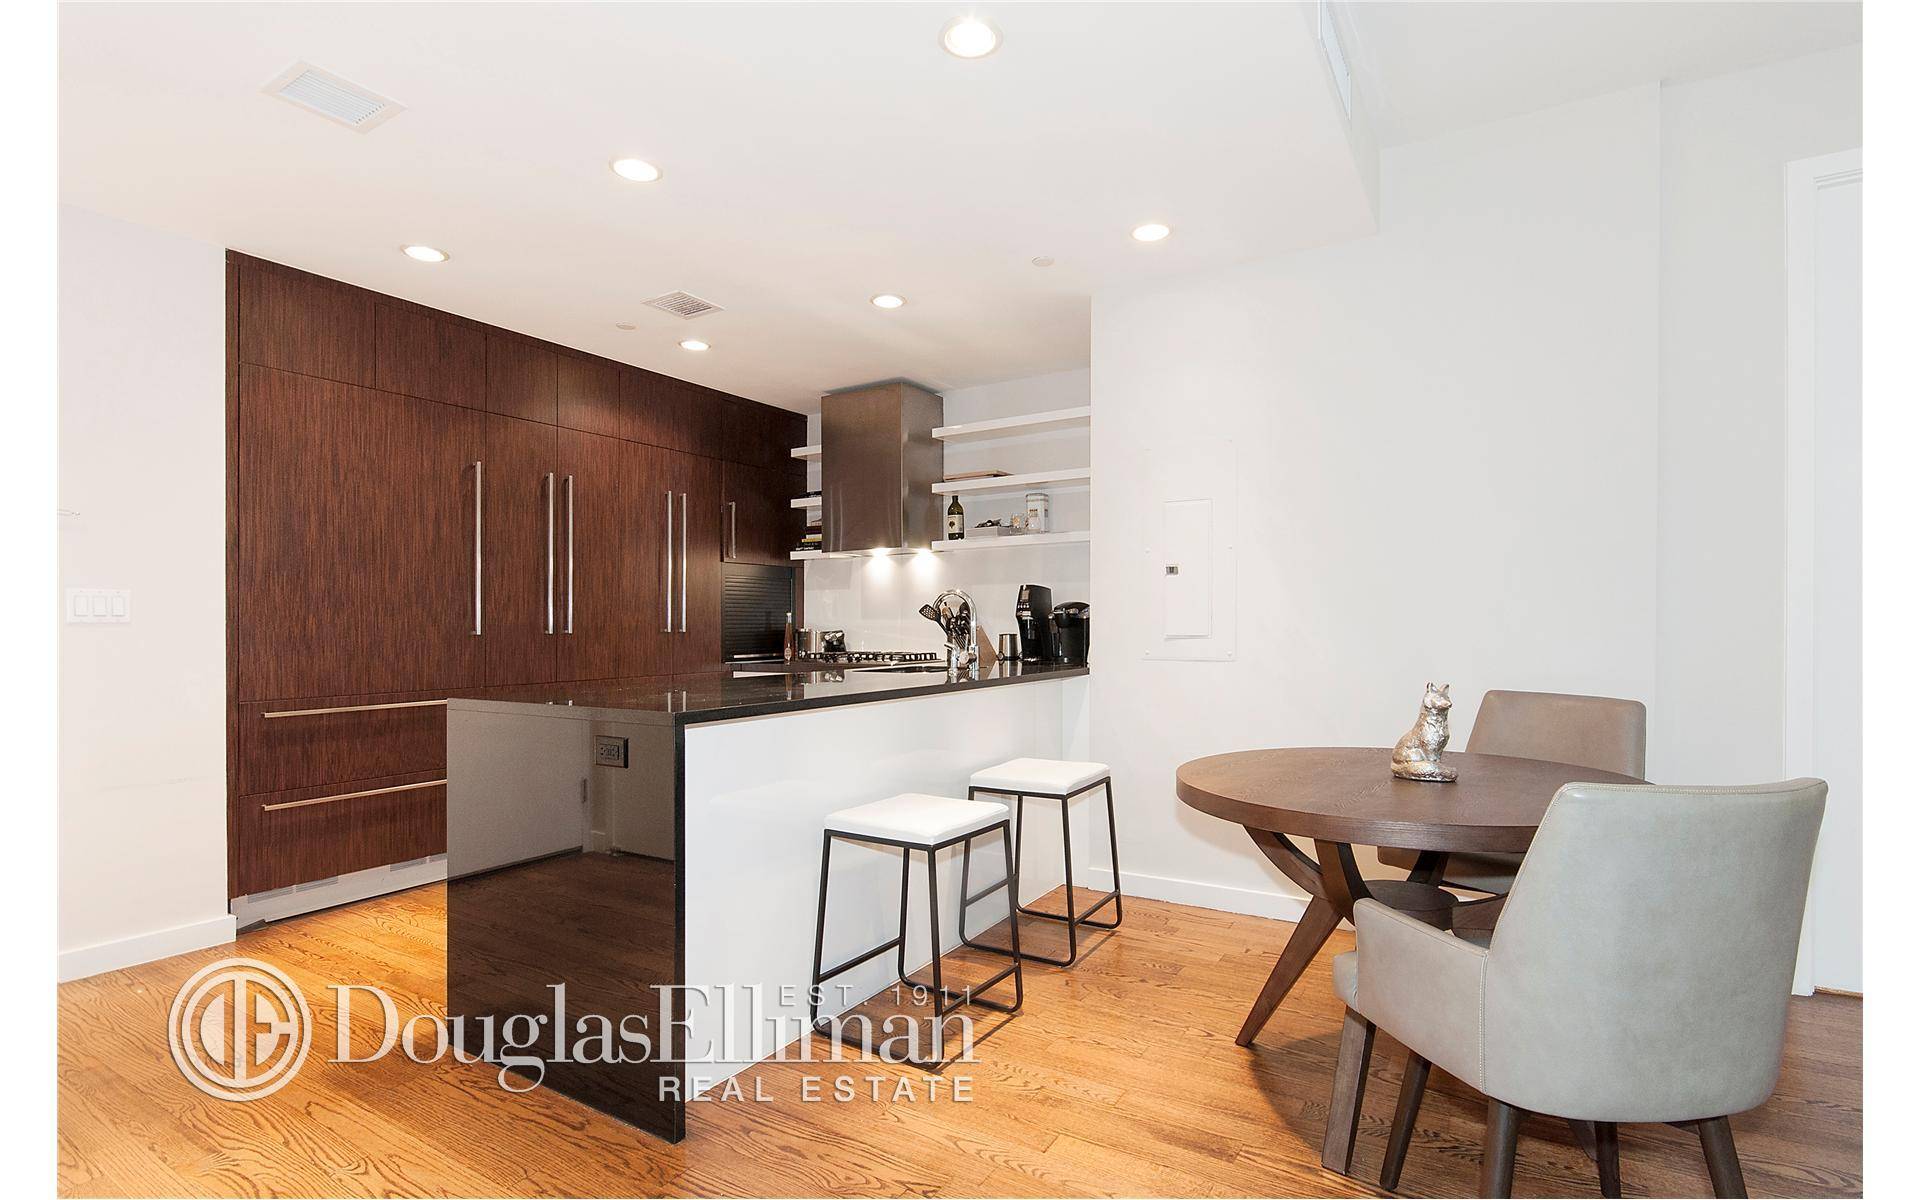 This stunning, south facing, corner, split 2 bed 2 bath apartment in one of Chelsea's finest boutique, full service, luxury condominiums has it all !